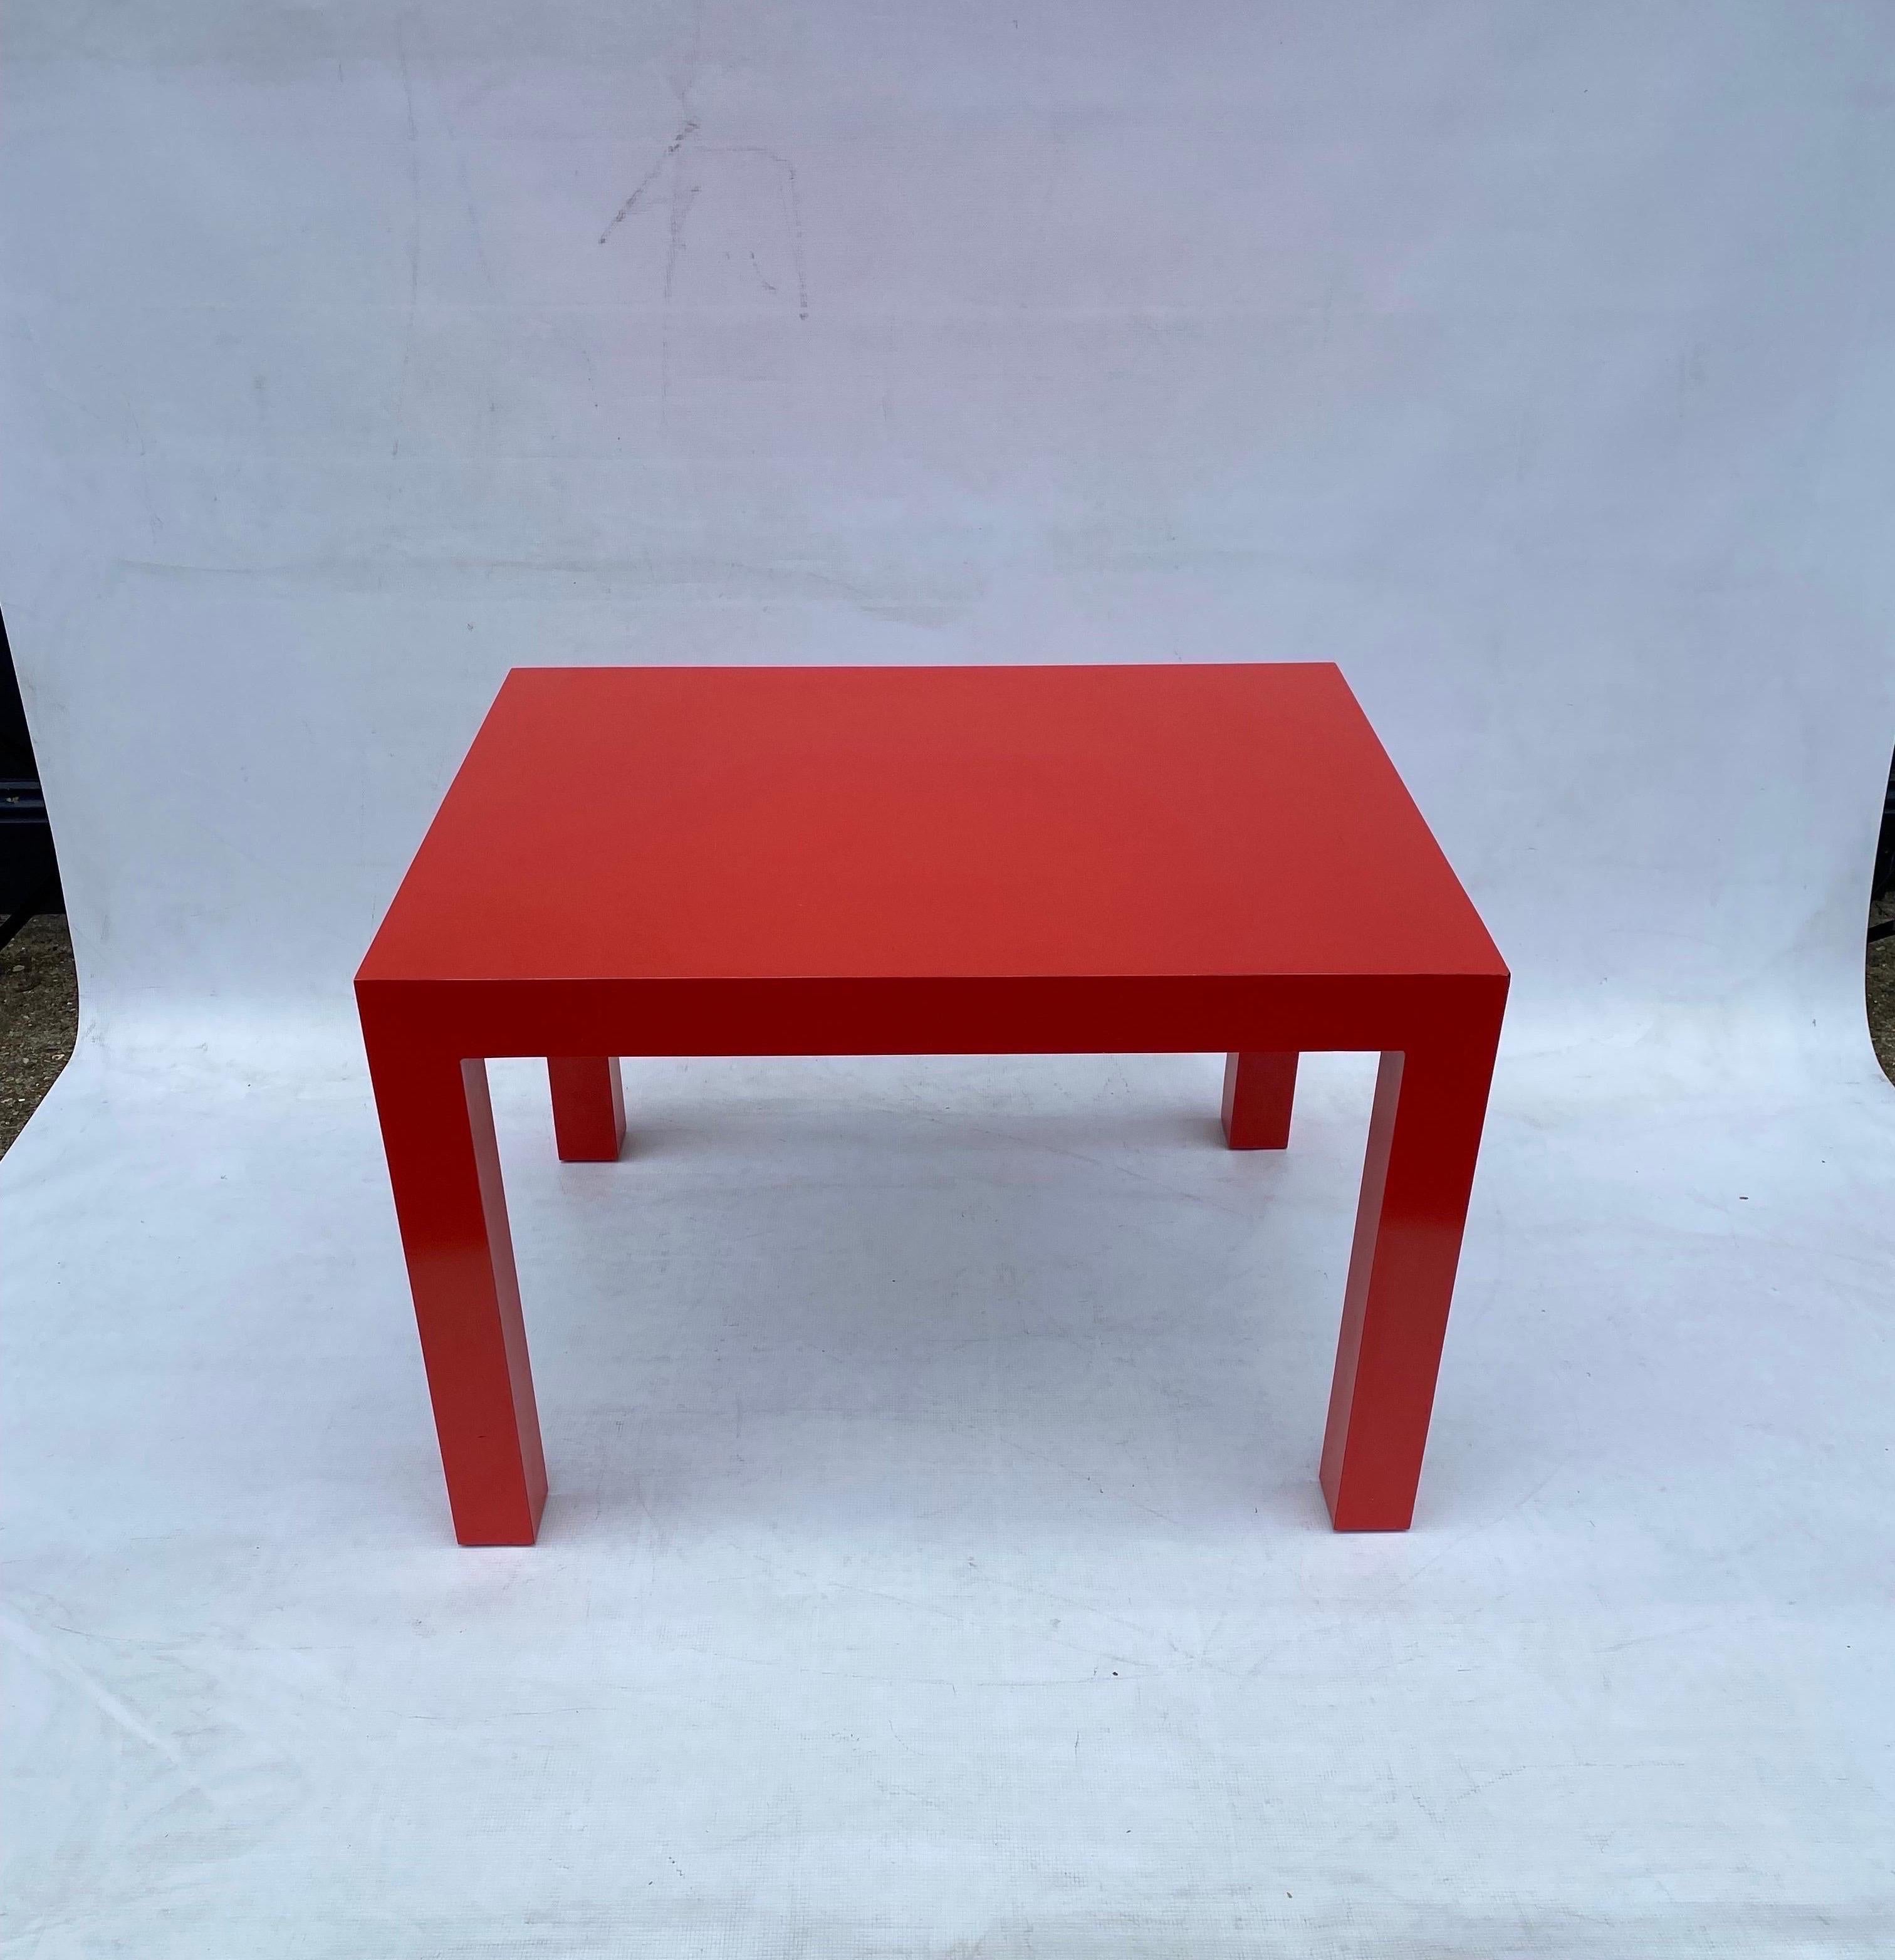 A slightly rectangular/near square side table with eye-catching coral red colour made from formica wood. This simple yet gorgeous piece has been created in the United States by Milo Baughman for Thayer Coggin in mid 1960s which perfectly resembles